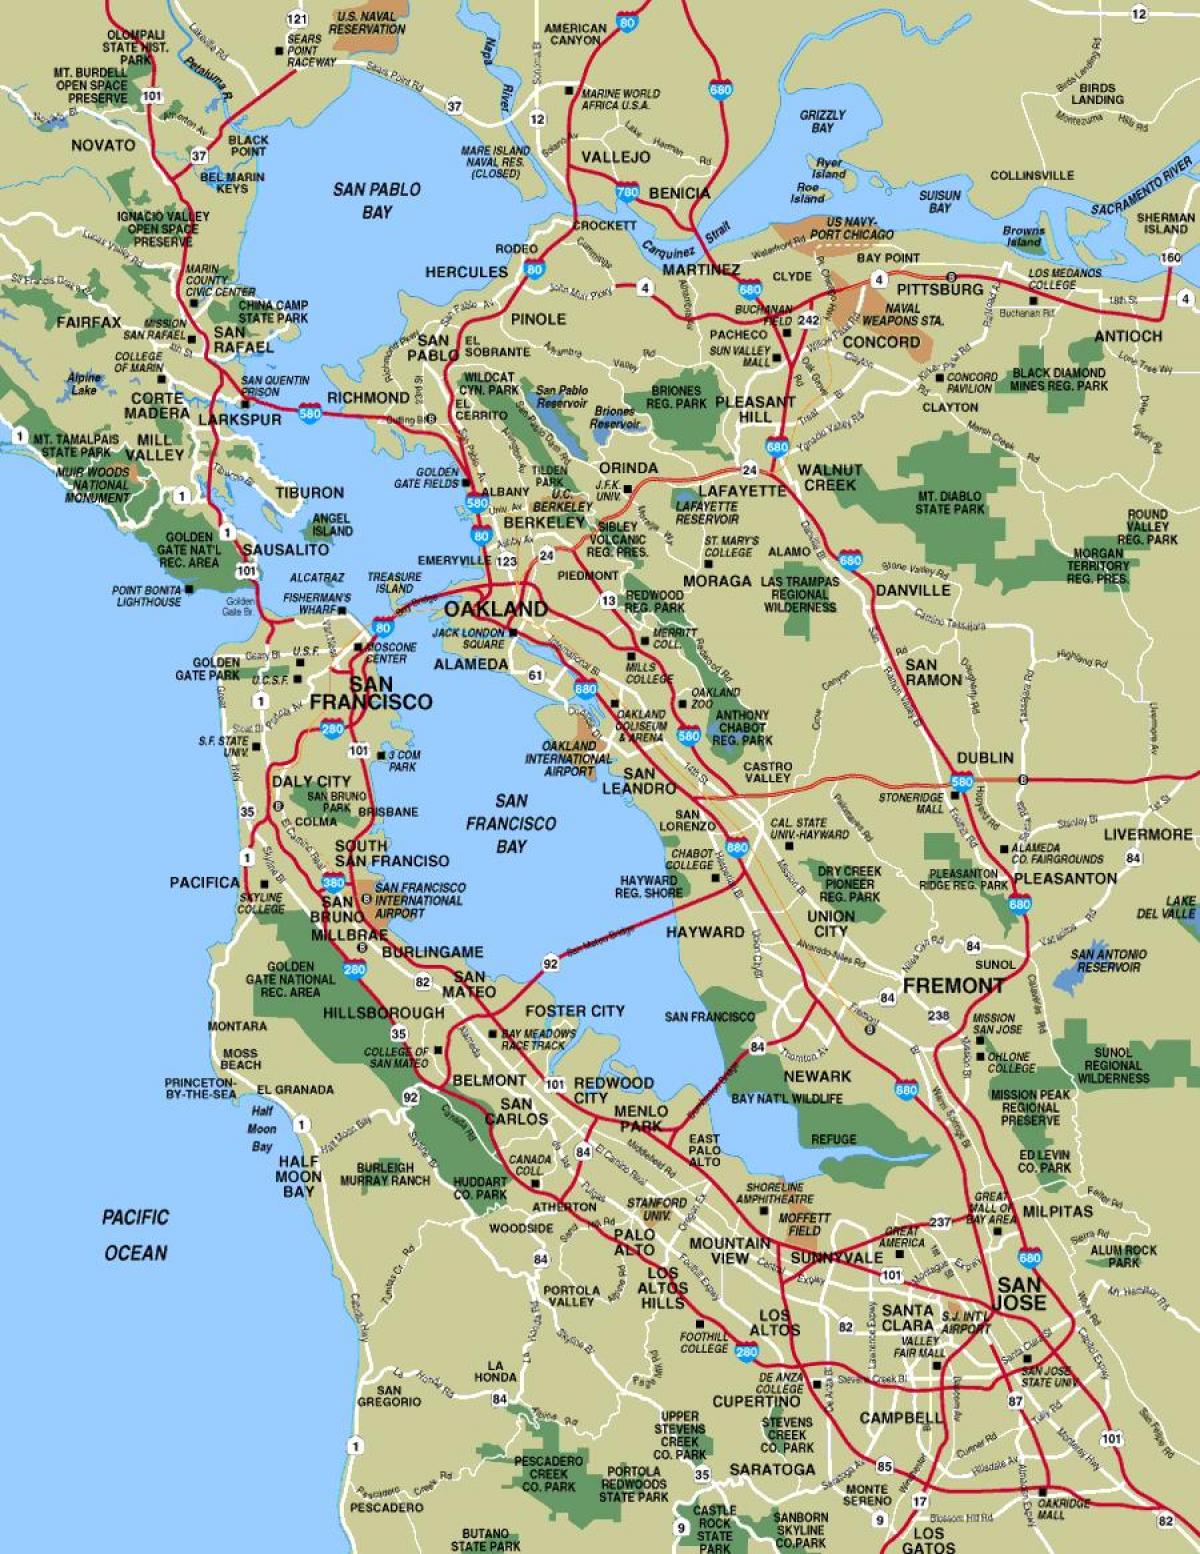 San Francisco and area map